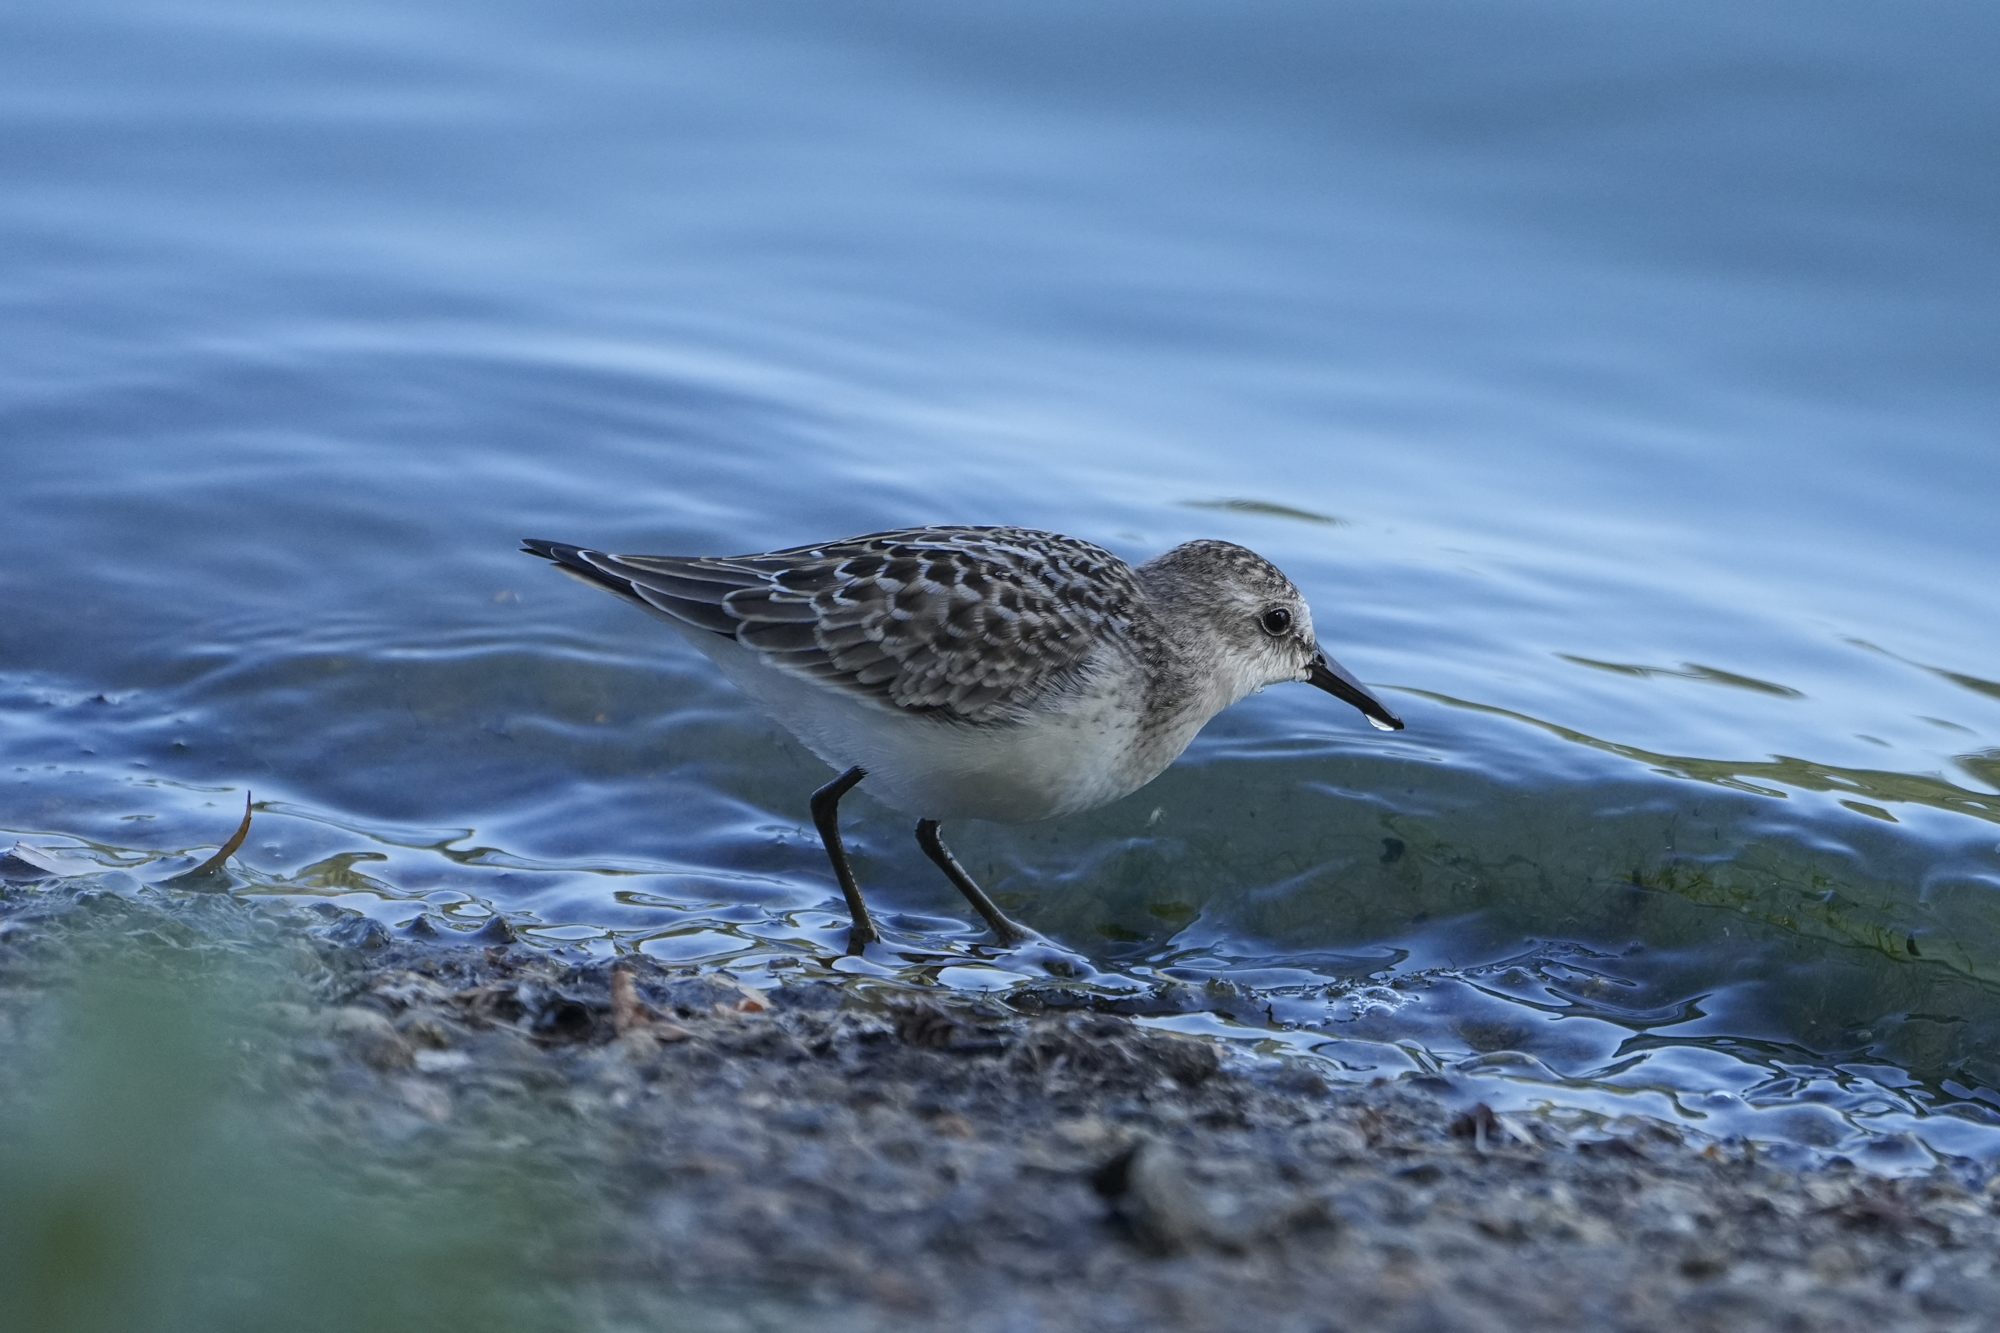 A Semipalmated Sandpiper at the water's edge, with a little drop of water hanging from its beak